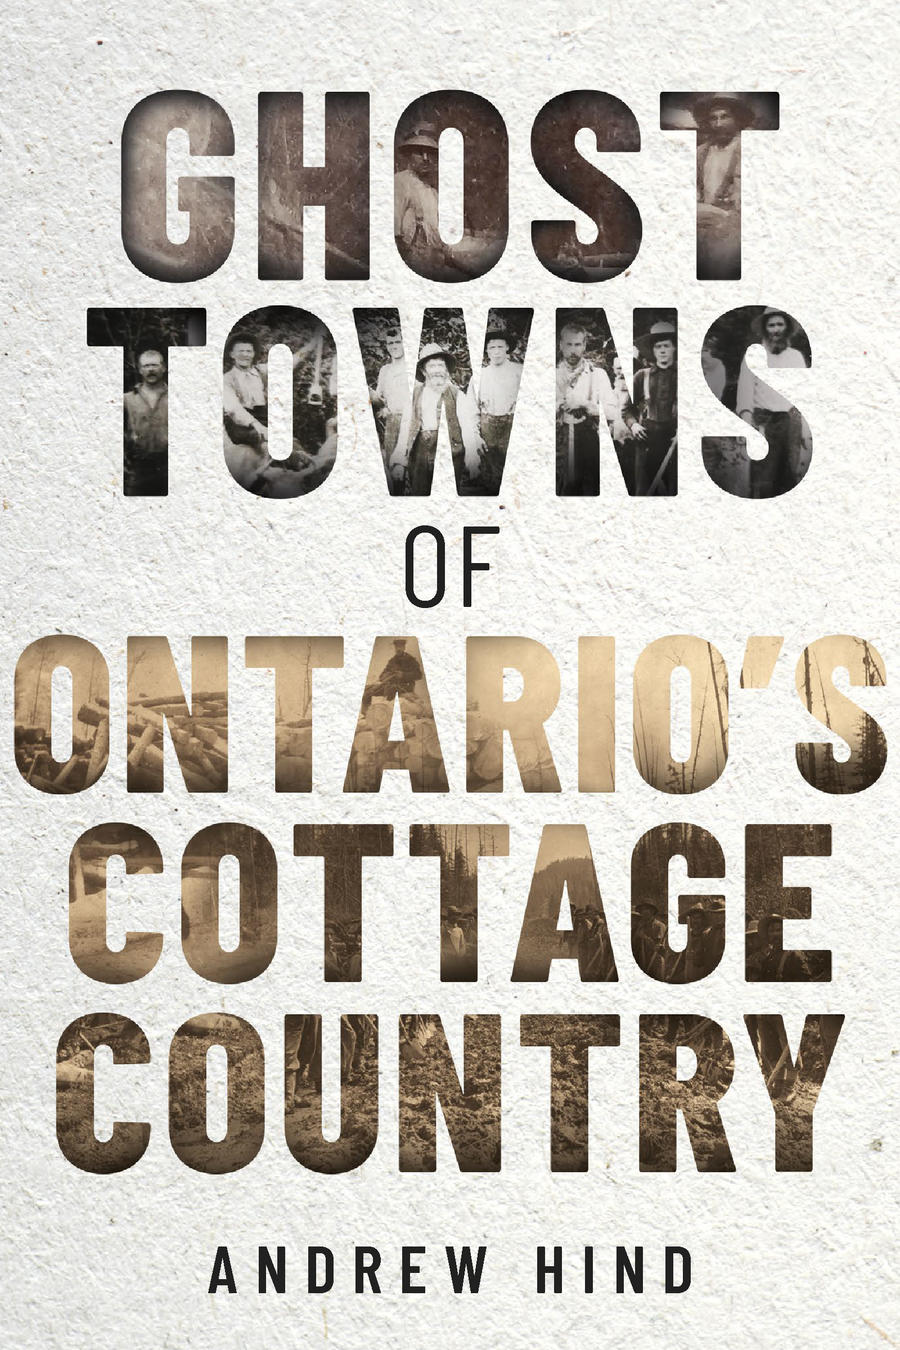 Where-in-Canada-Ghost-Towns-of-Ontario-s-Cottage-Country – Alllitup.ca